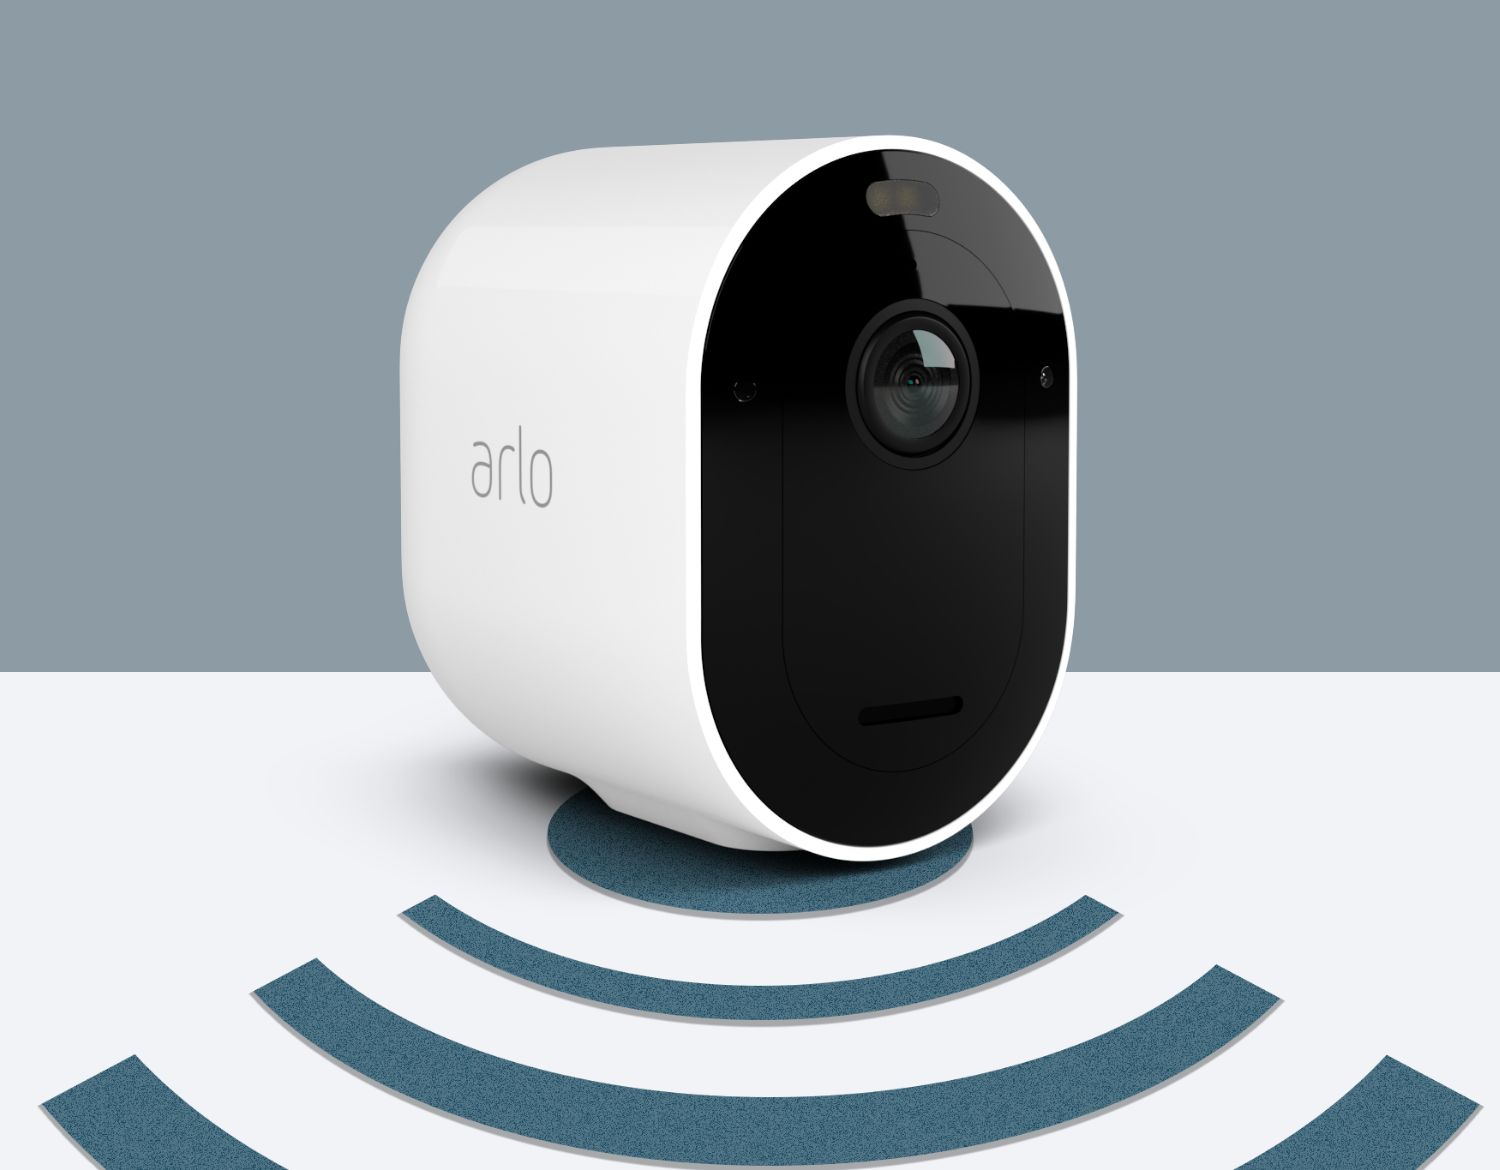 A photo illustrates an Arlo security camera connecting direct to a 2.4Ghz wi-fi network